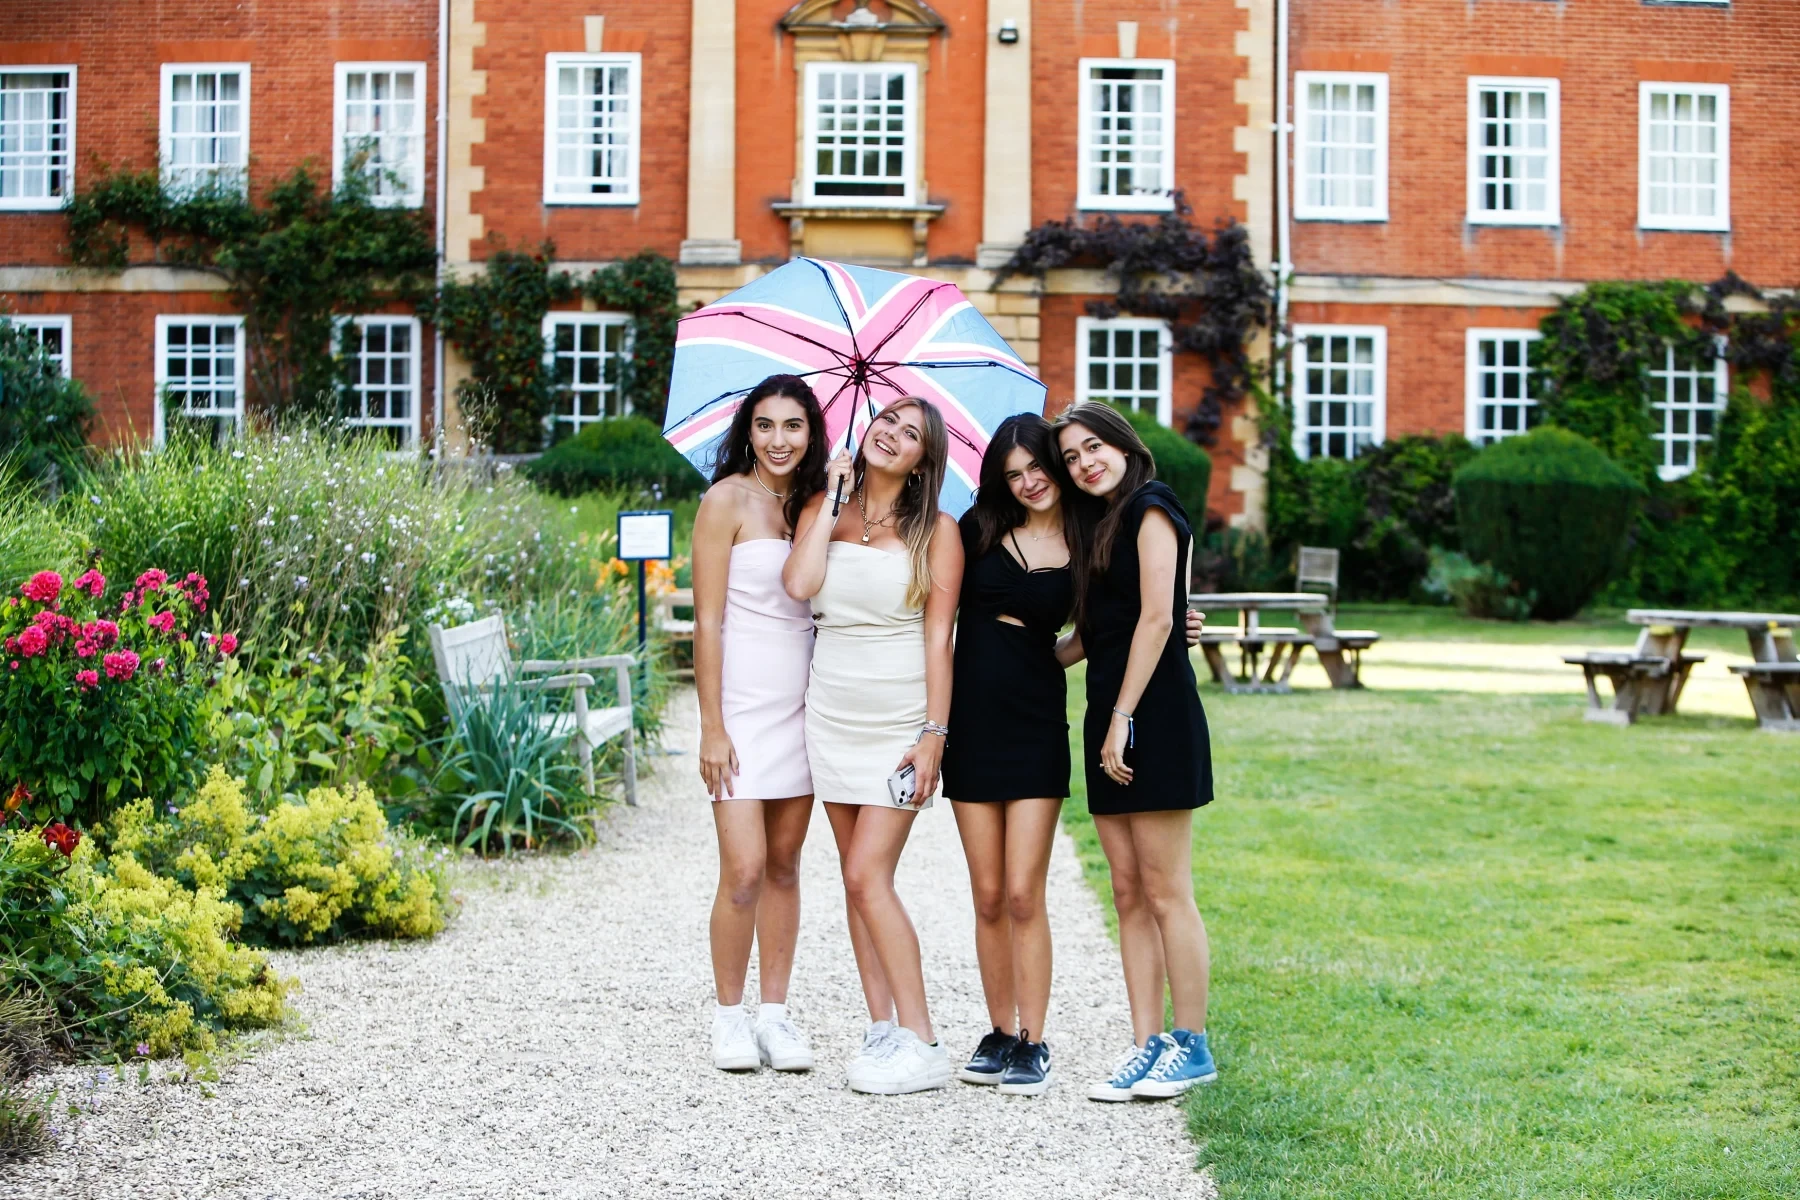 Teenagers aged 13-15 at Lady Margaret Hall, Oxford on July 21, 2023